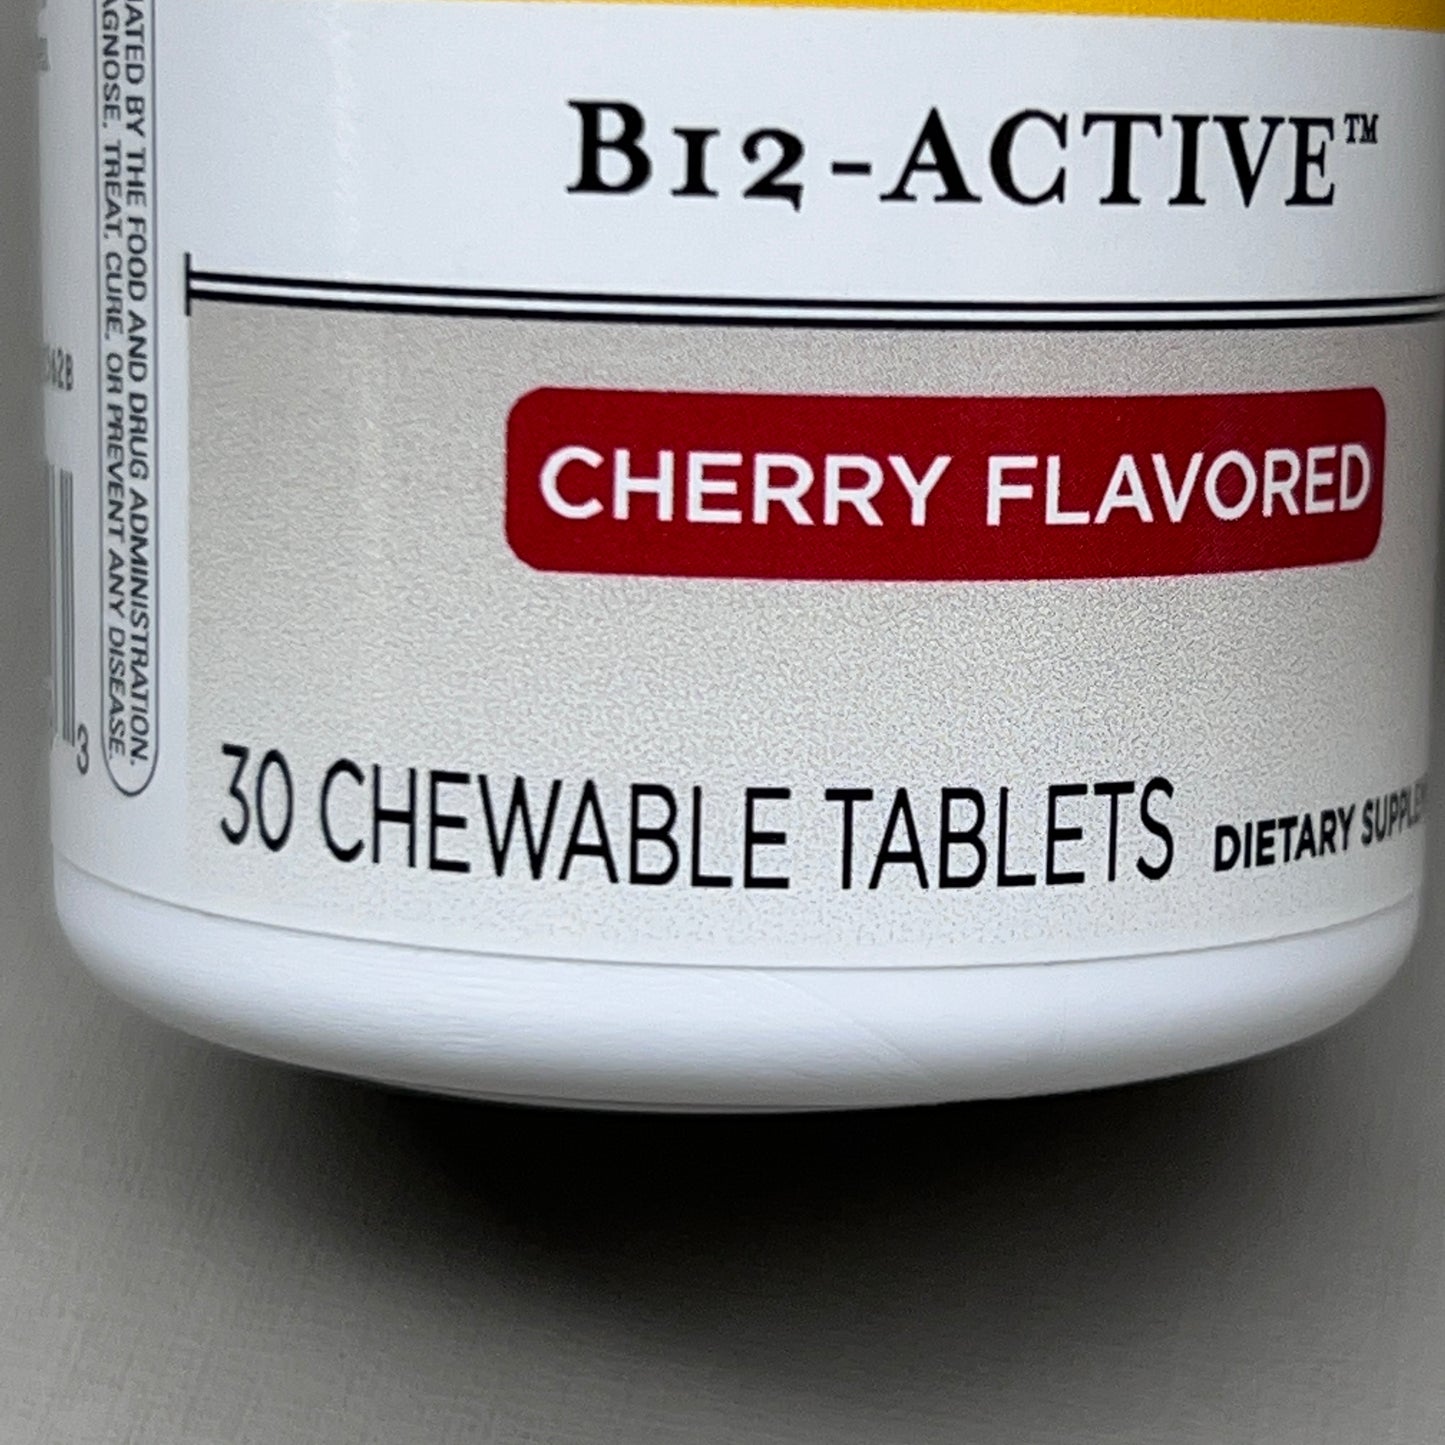 INTEGRATIVE THERAPEUTICS B12-Active Supplement 30 Chewable Tablets 6/25 (New)